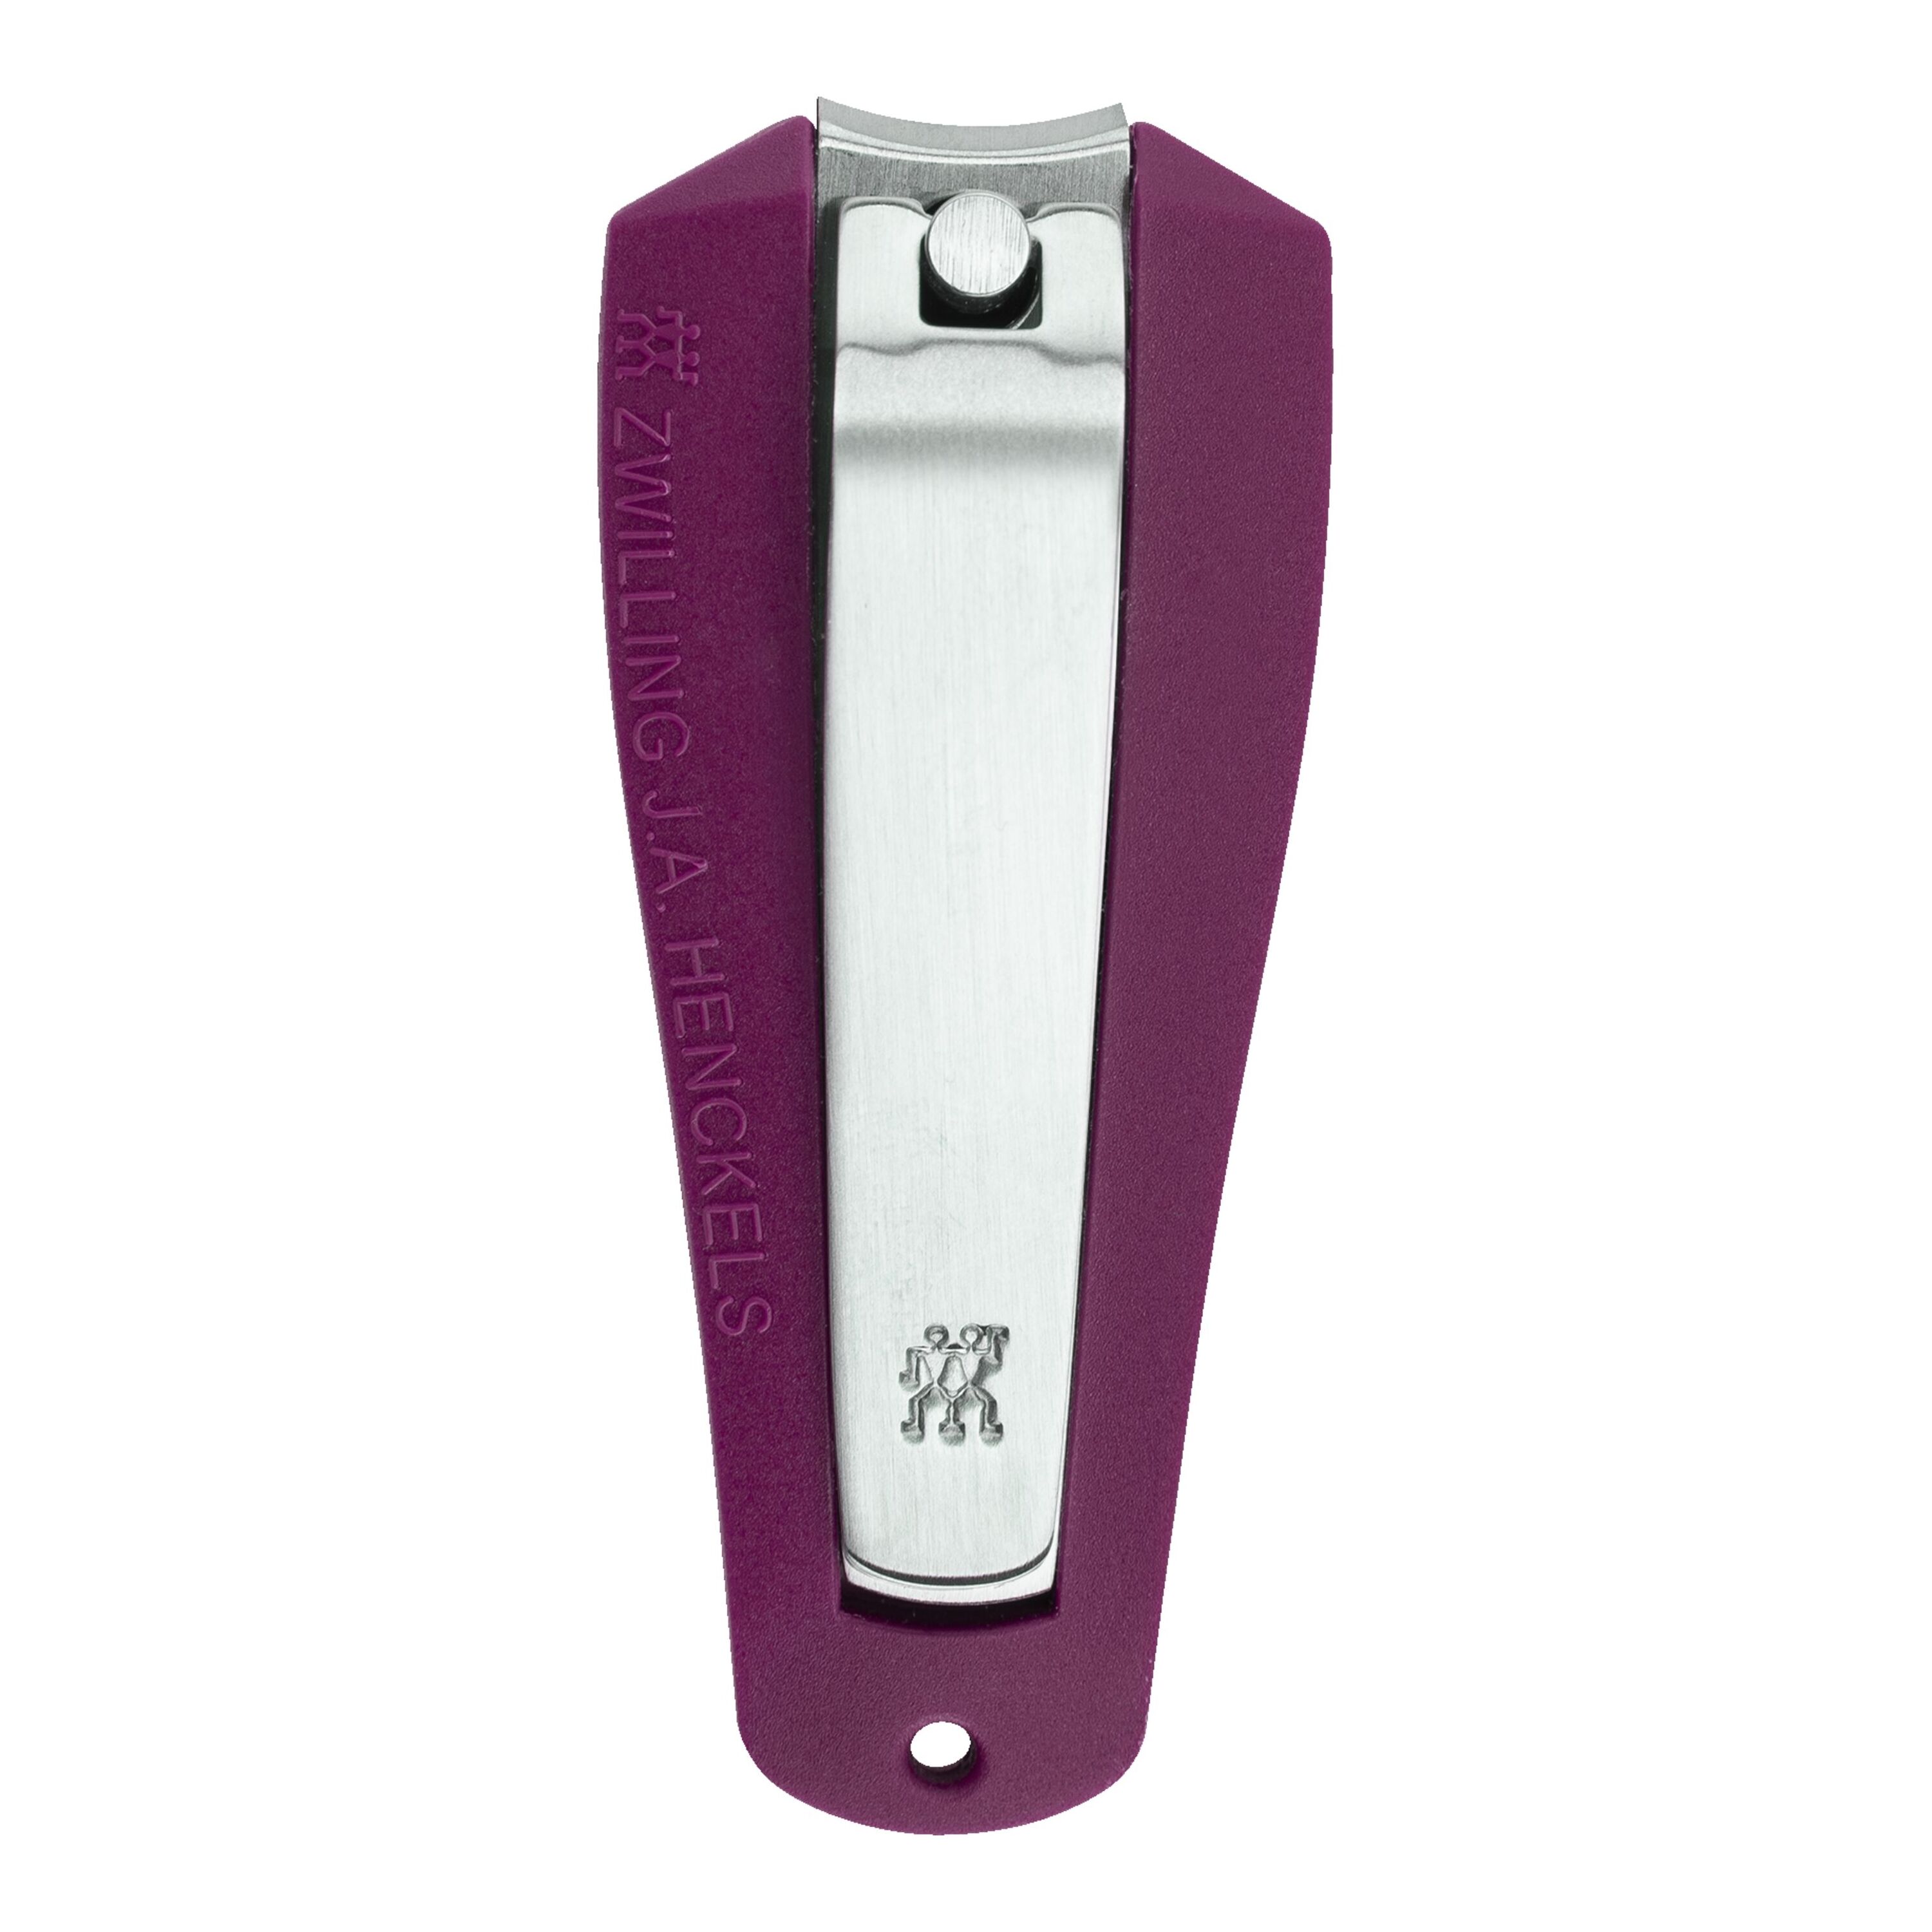 Zwilling J.A. Henckels Nail clippers, ref: 42422-001